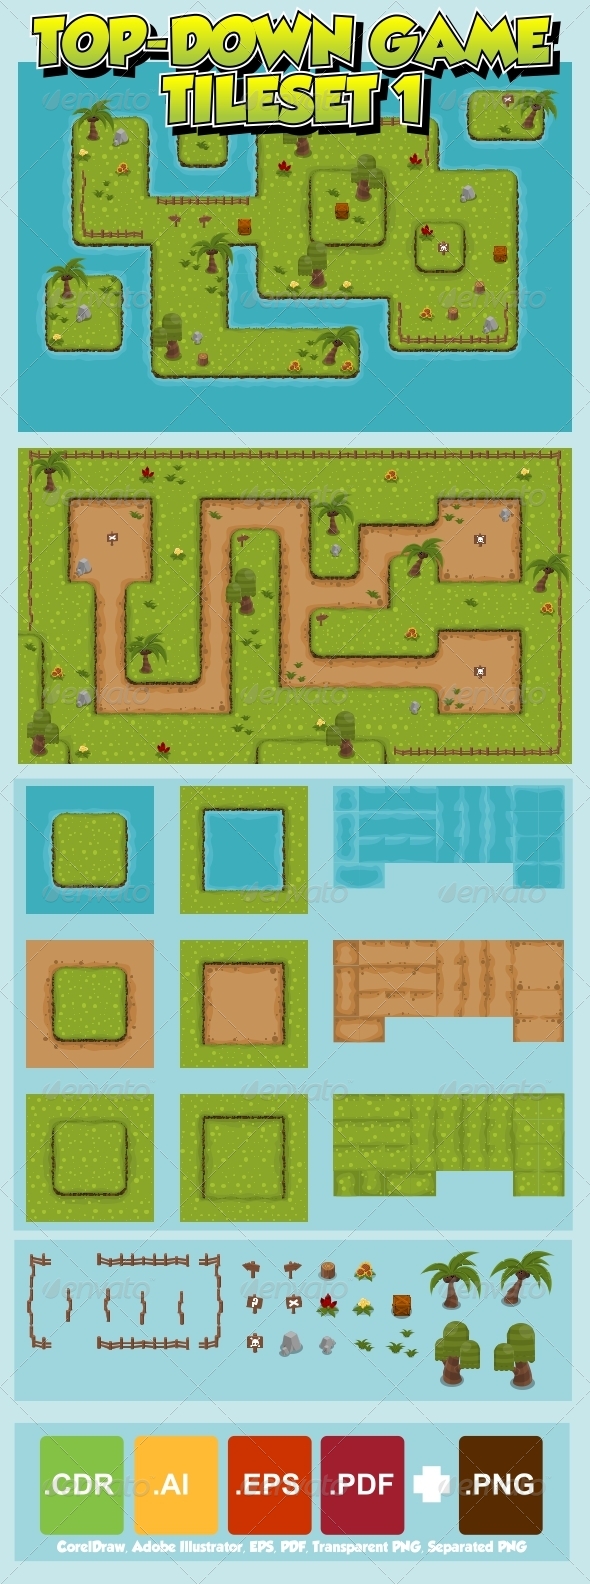 Top Down Game Tileset 1 By PzUH GraphicRiver